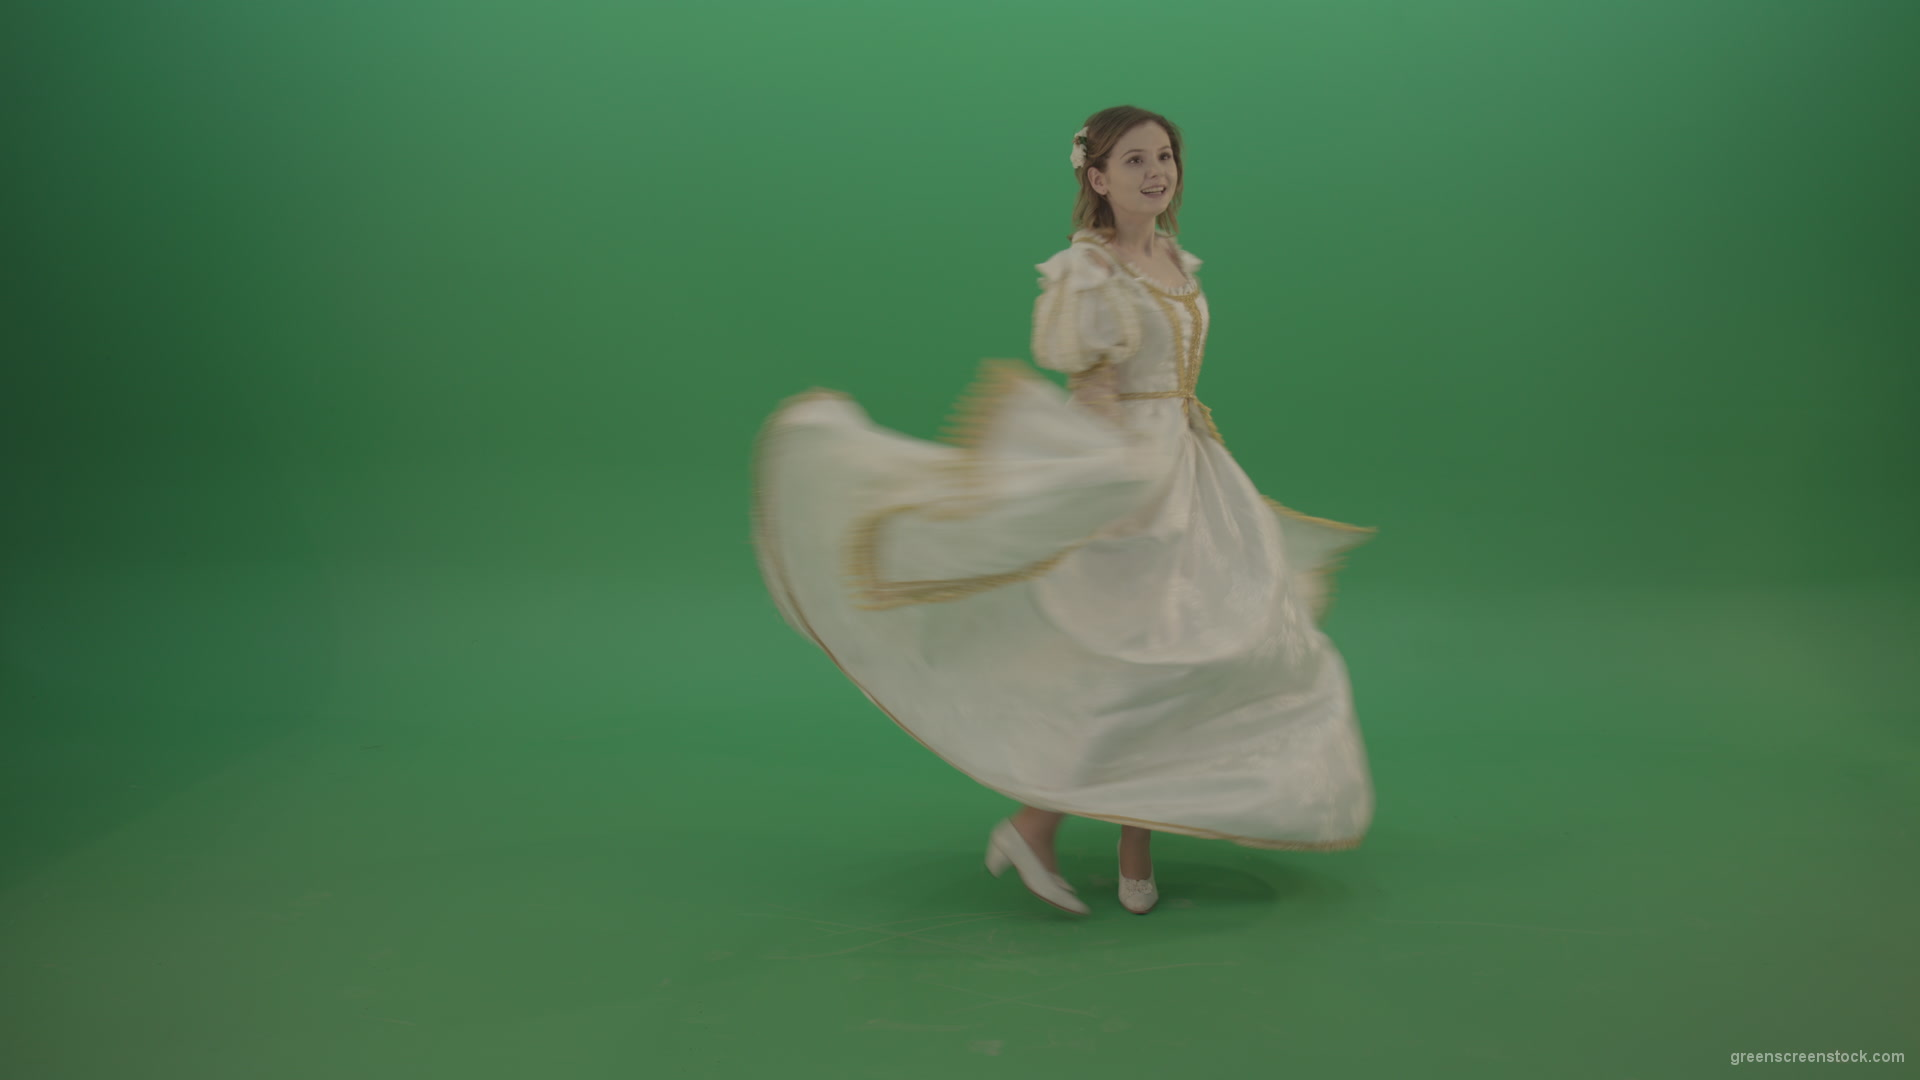 Merry-medieval-girl-dancing-and-rejoicing-isolated-on-green-background_005 Green Screen Stock